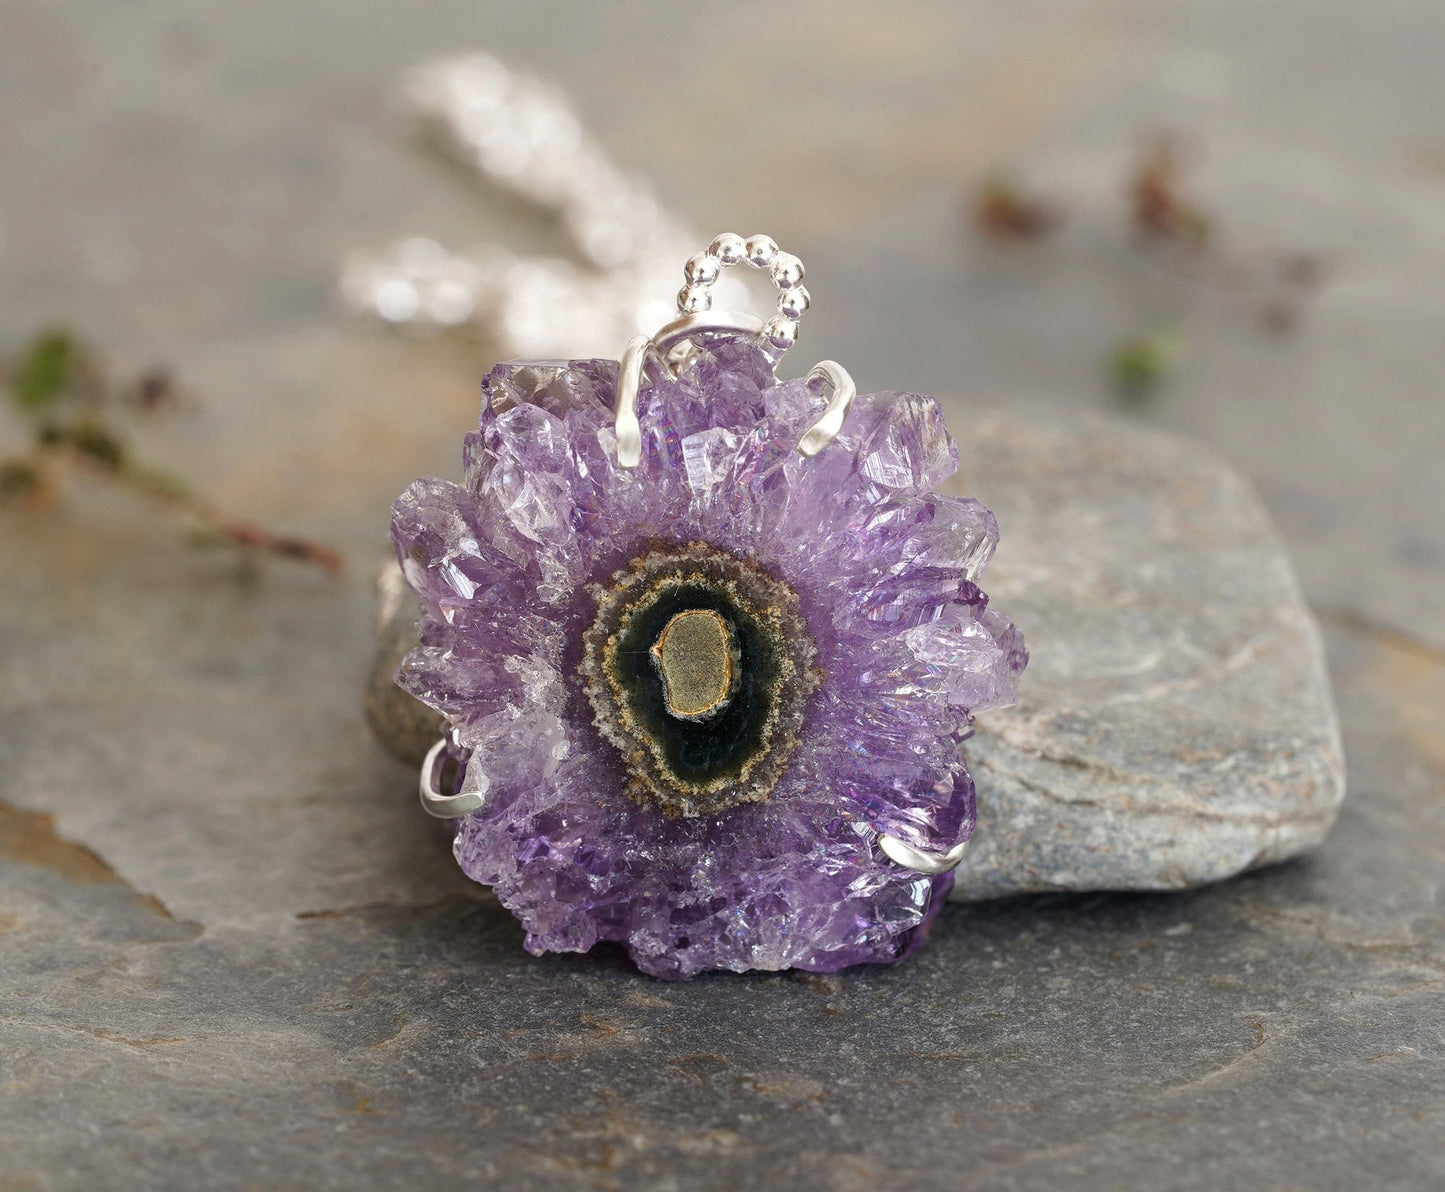 Amethyst Geode Necklace in Sterling Silver, One of a Kind Amethyst Necklace